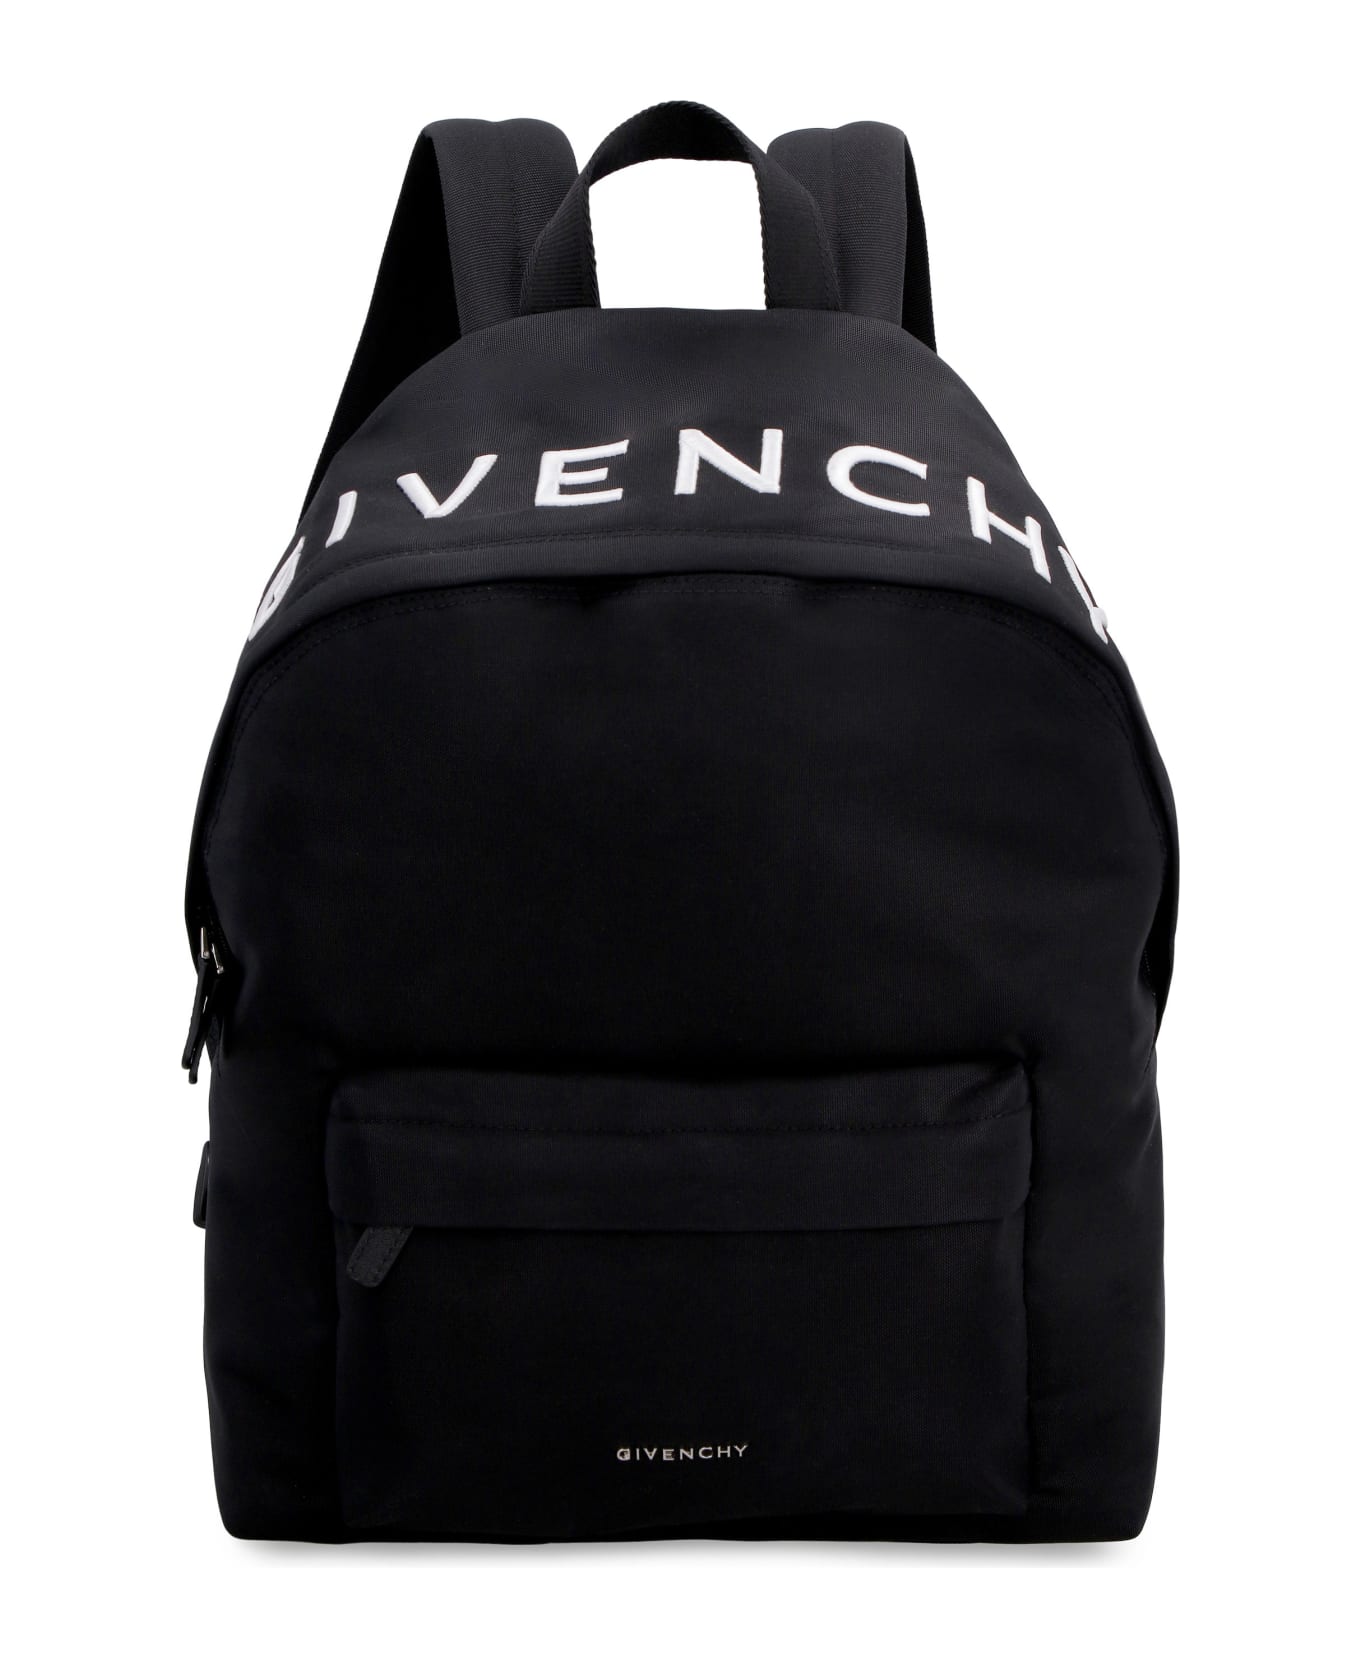 Givenchy Fabric Embroidered Backpack - Black